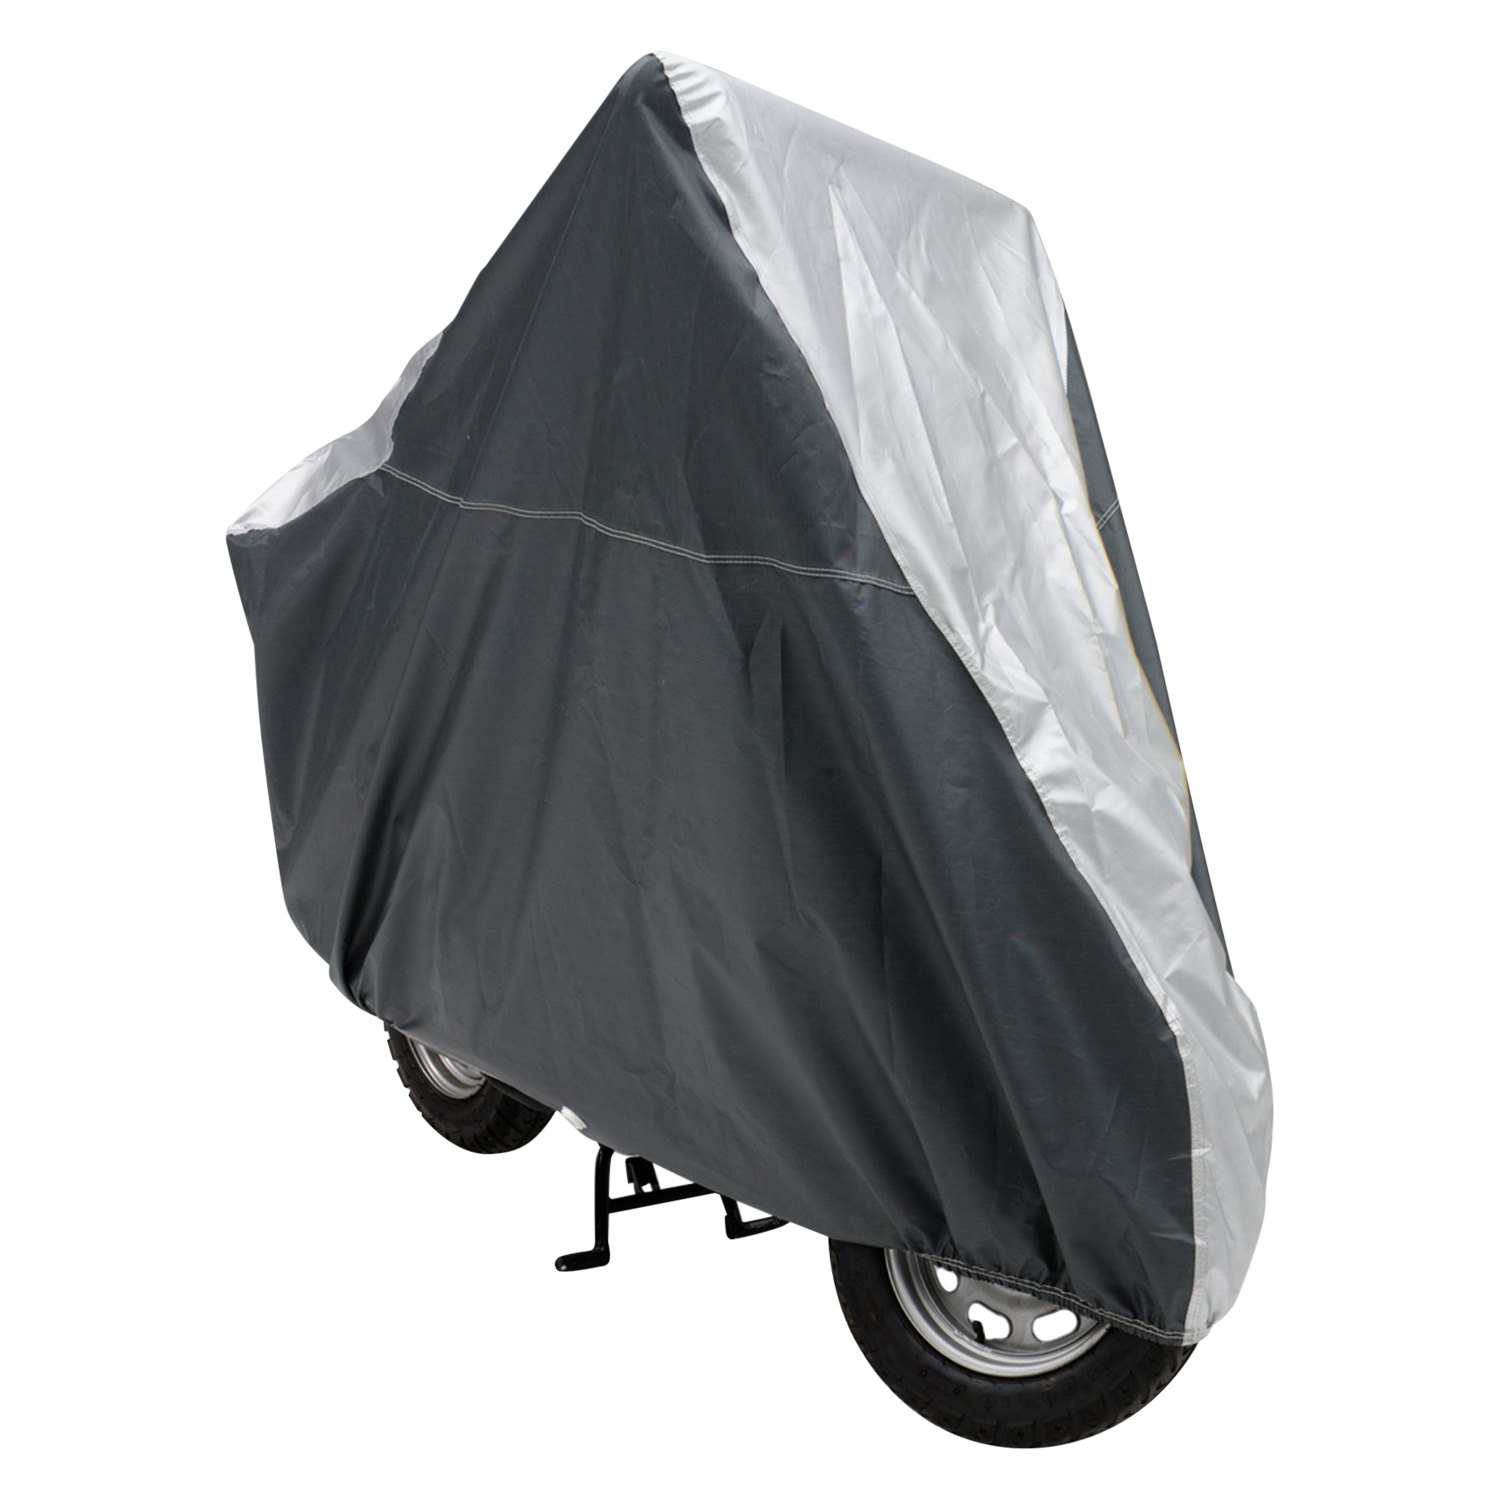 Covercraft® Ready-Fit™ Silver Scooter Cover